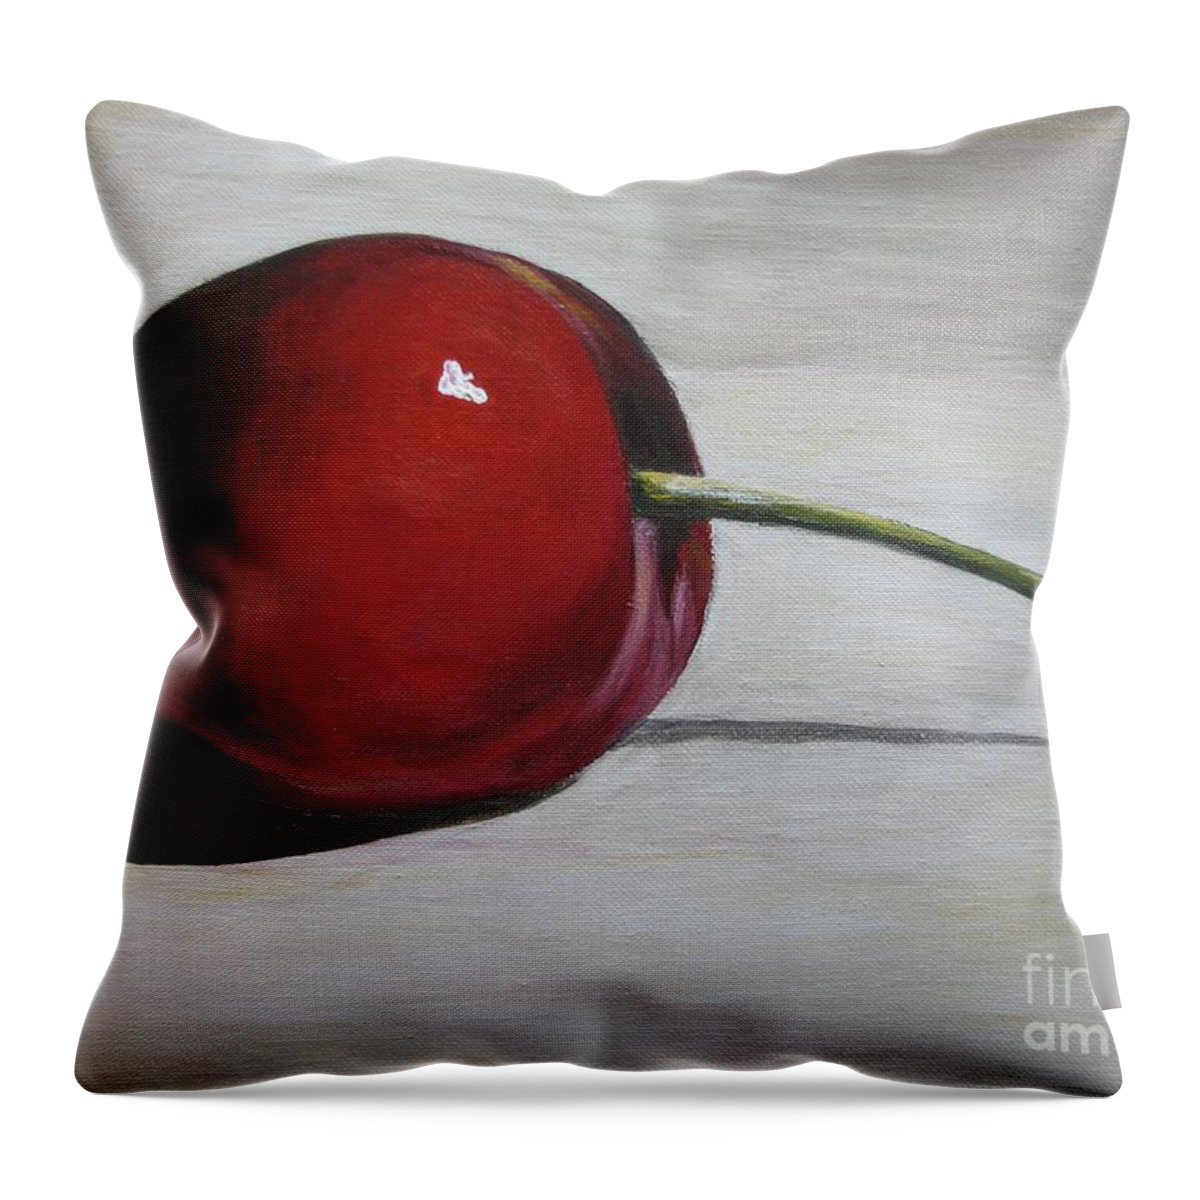 Cherry Throw Pillow featuring the painting Cherry by Italian Art